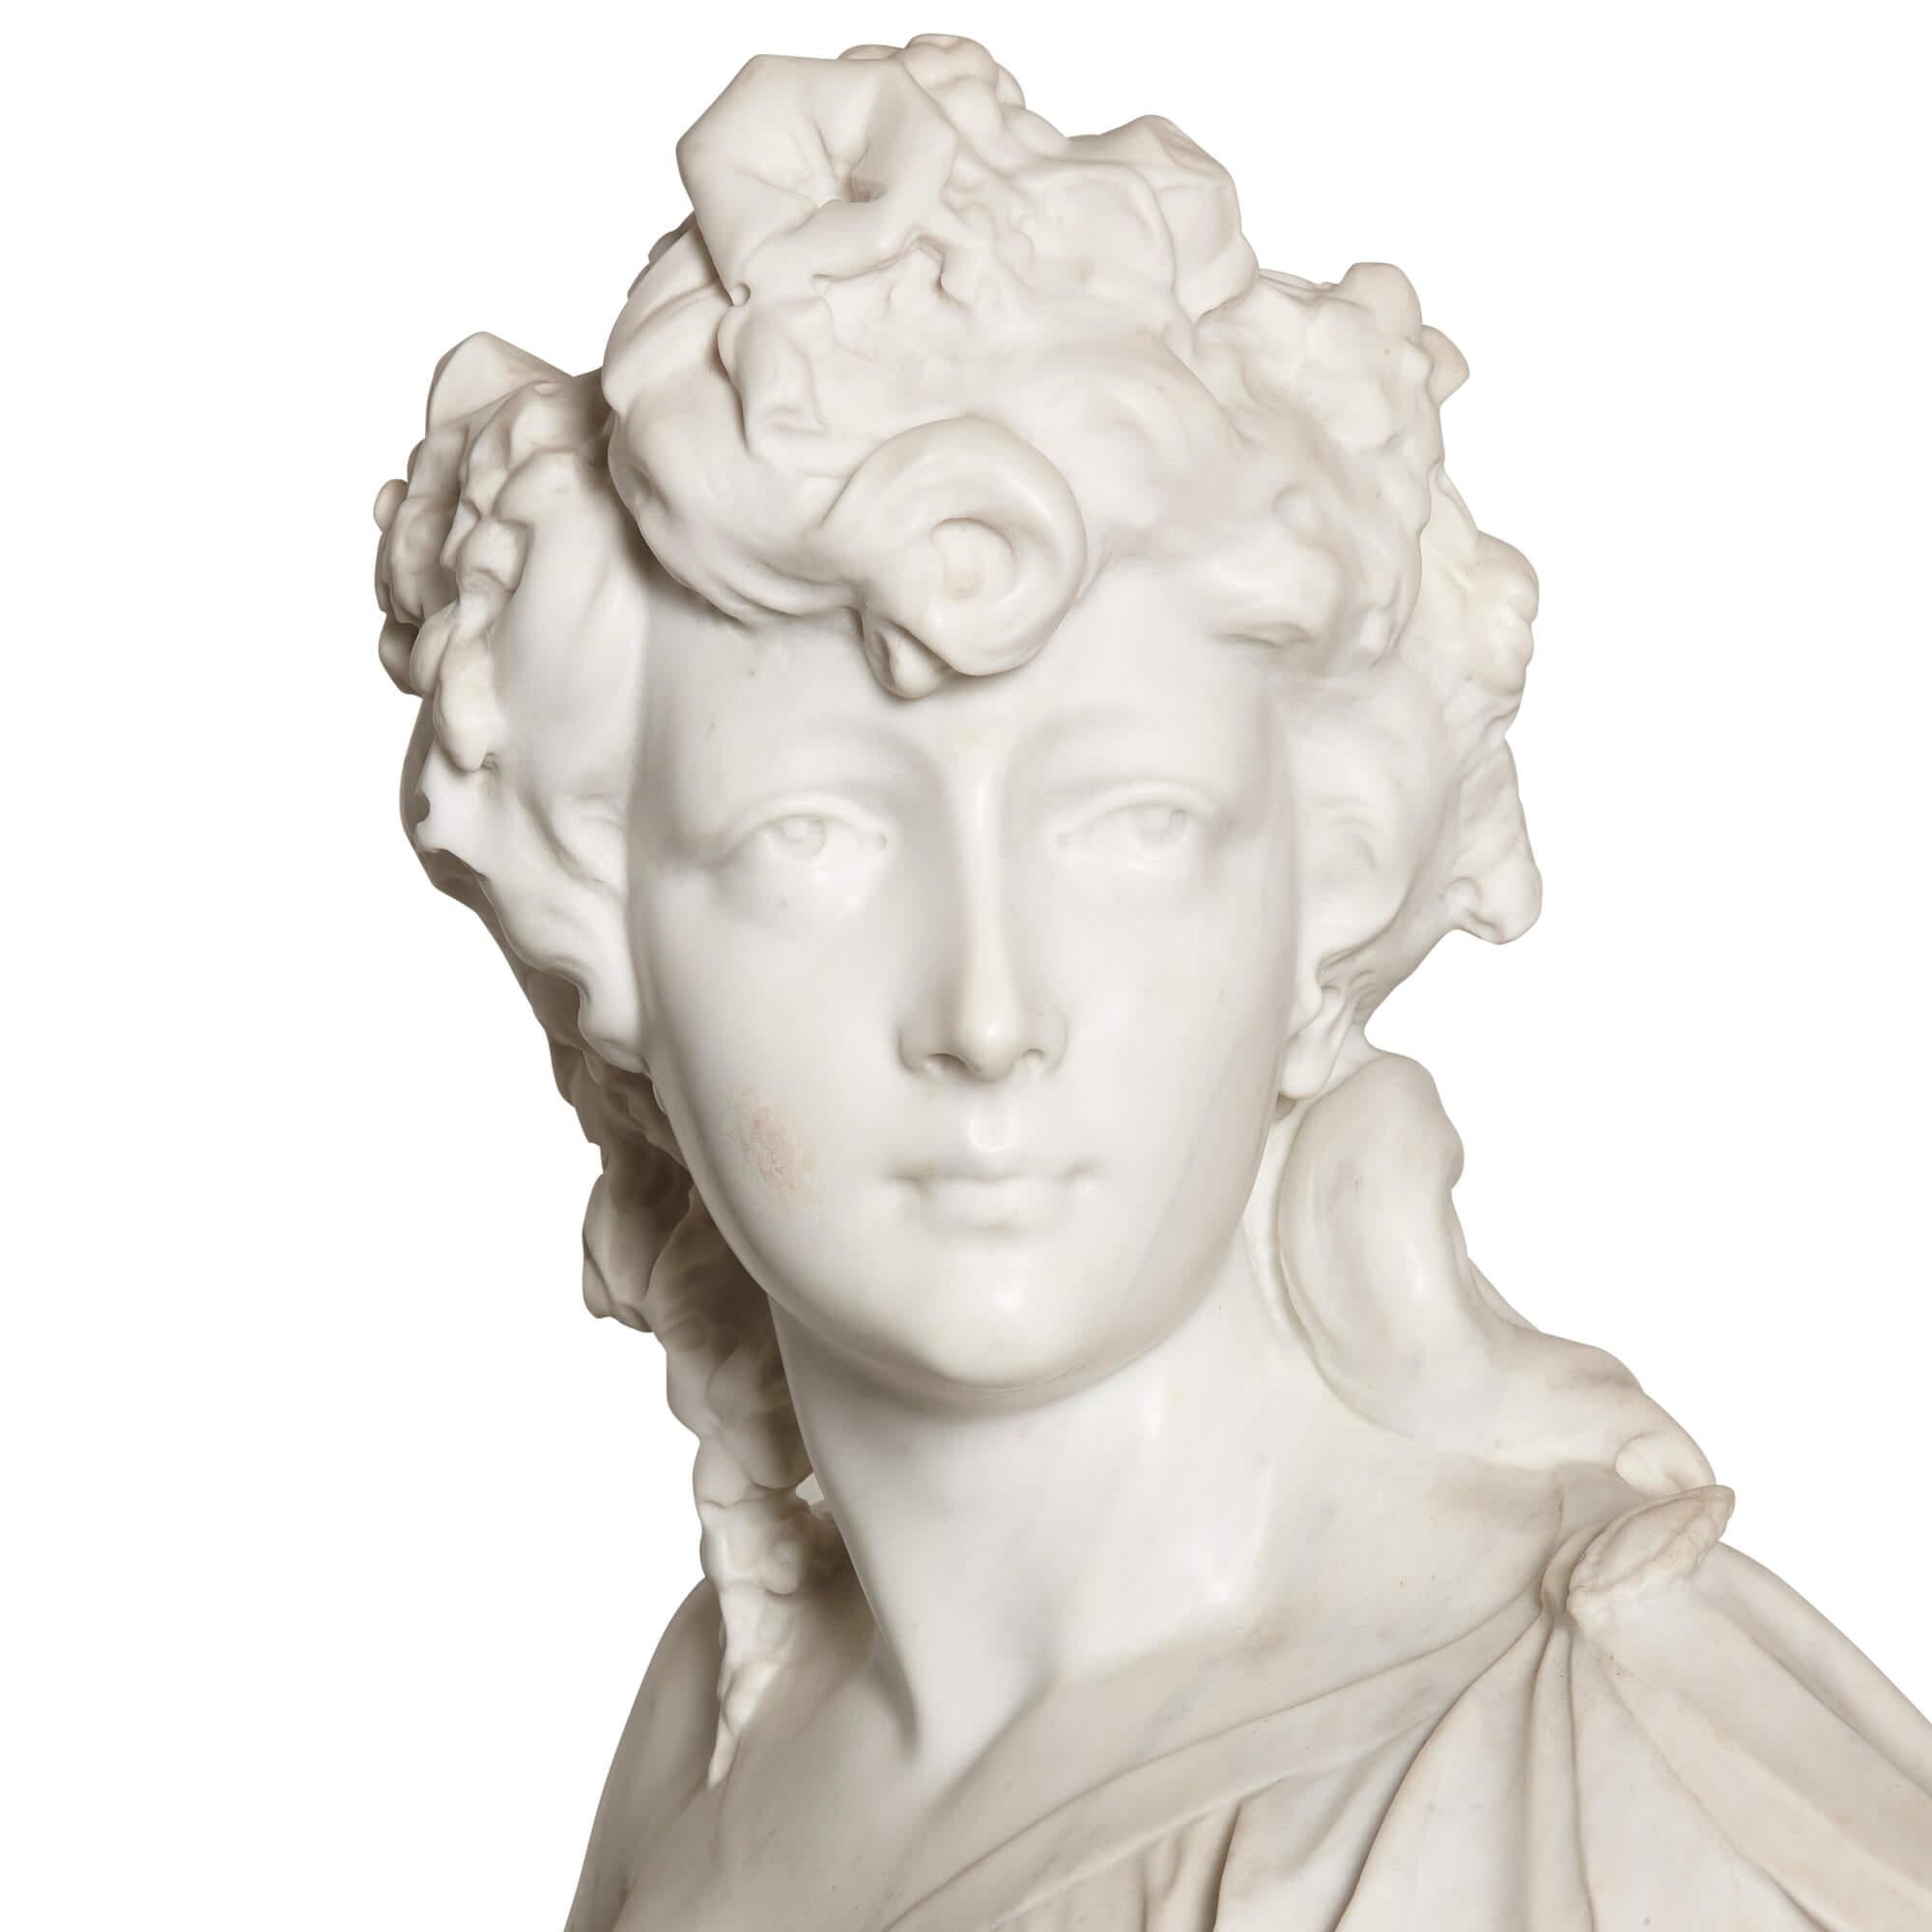 Renaissance Life-Size Marble Sculpture of Spring by Antonio Frilli For Sale